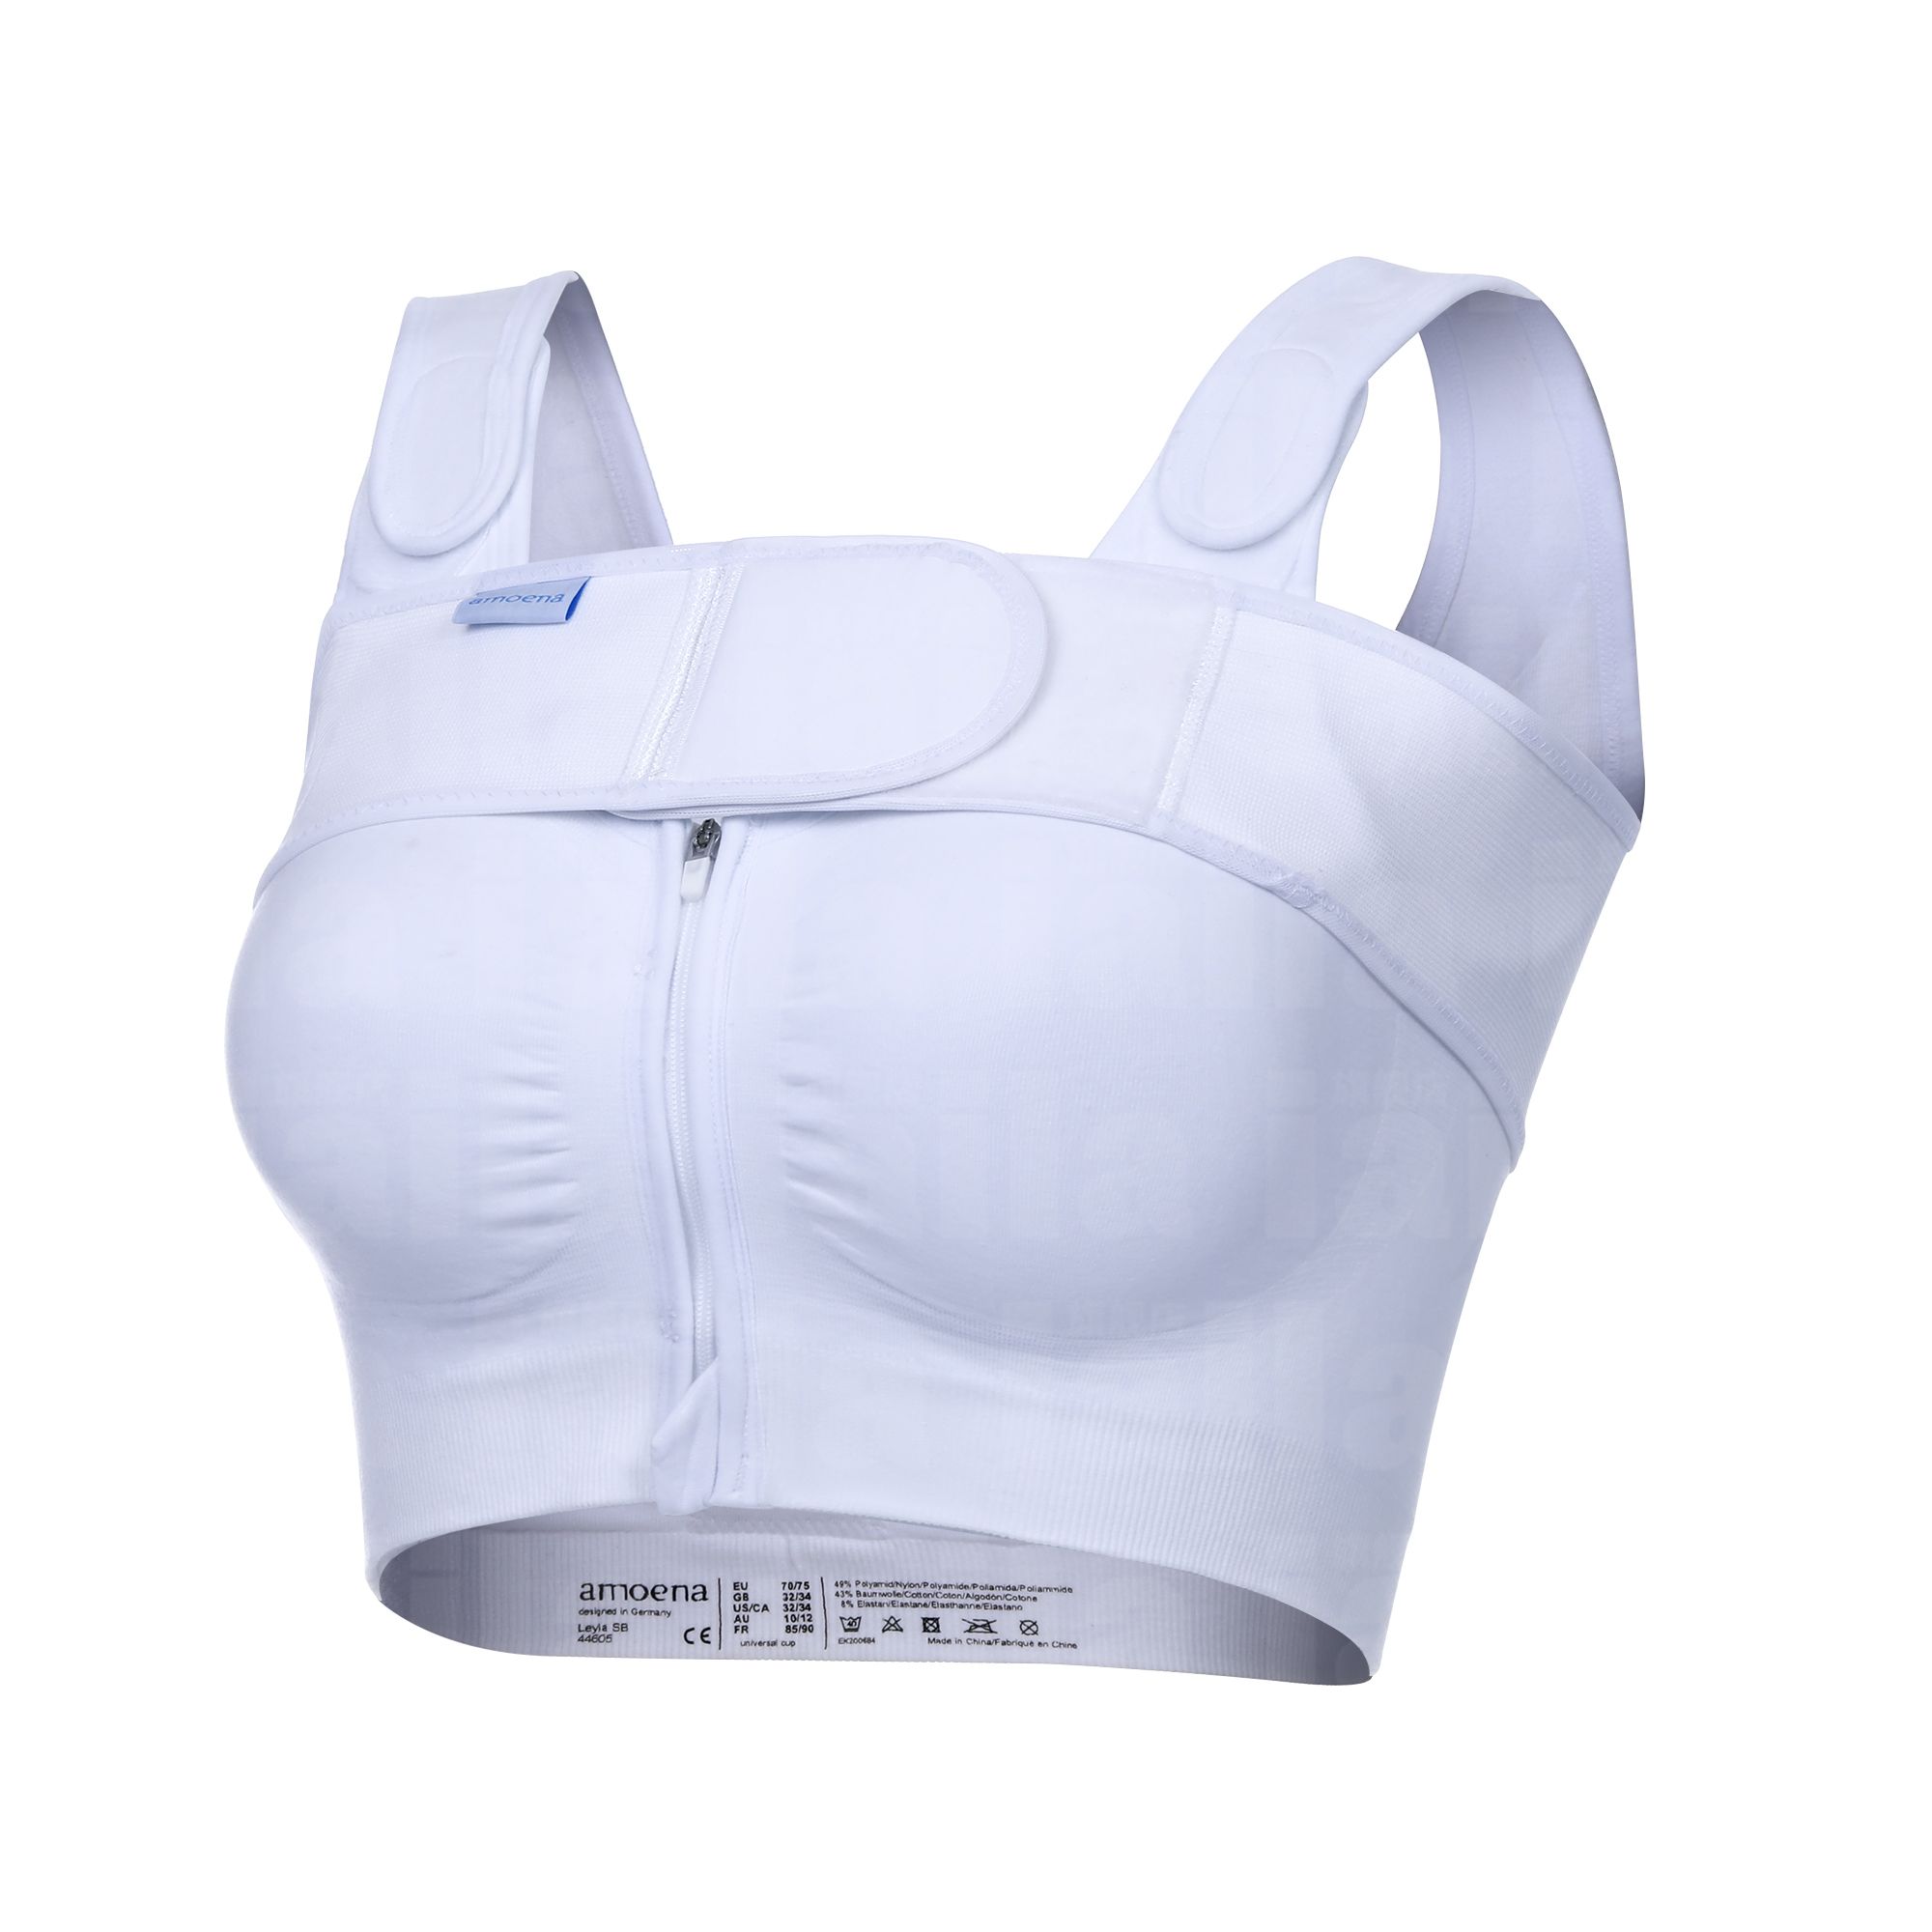 Bra + Insert Silicone Breast Form Seamless Pocket Filling